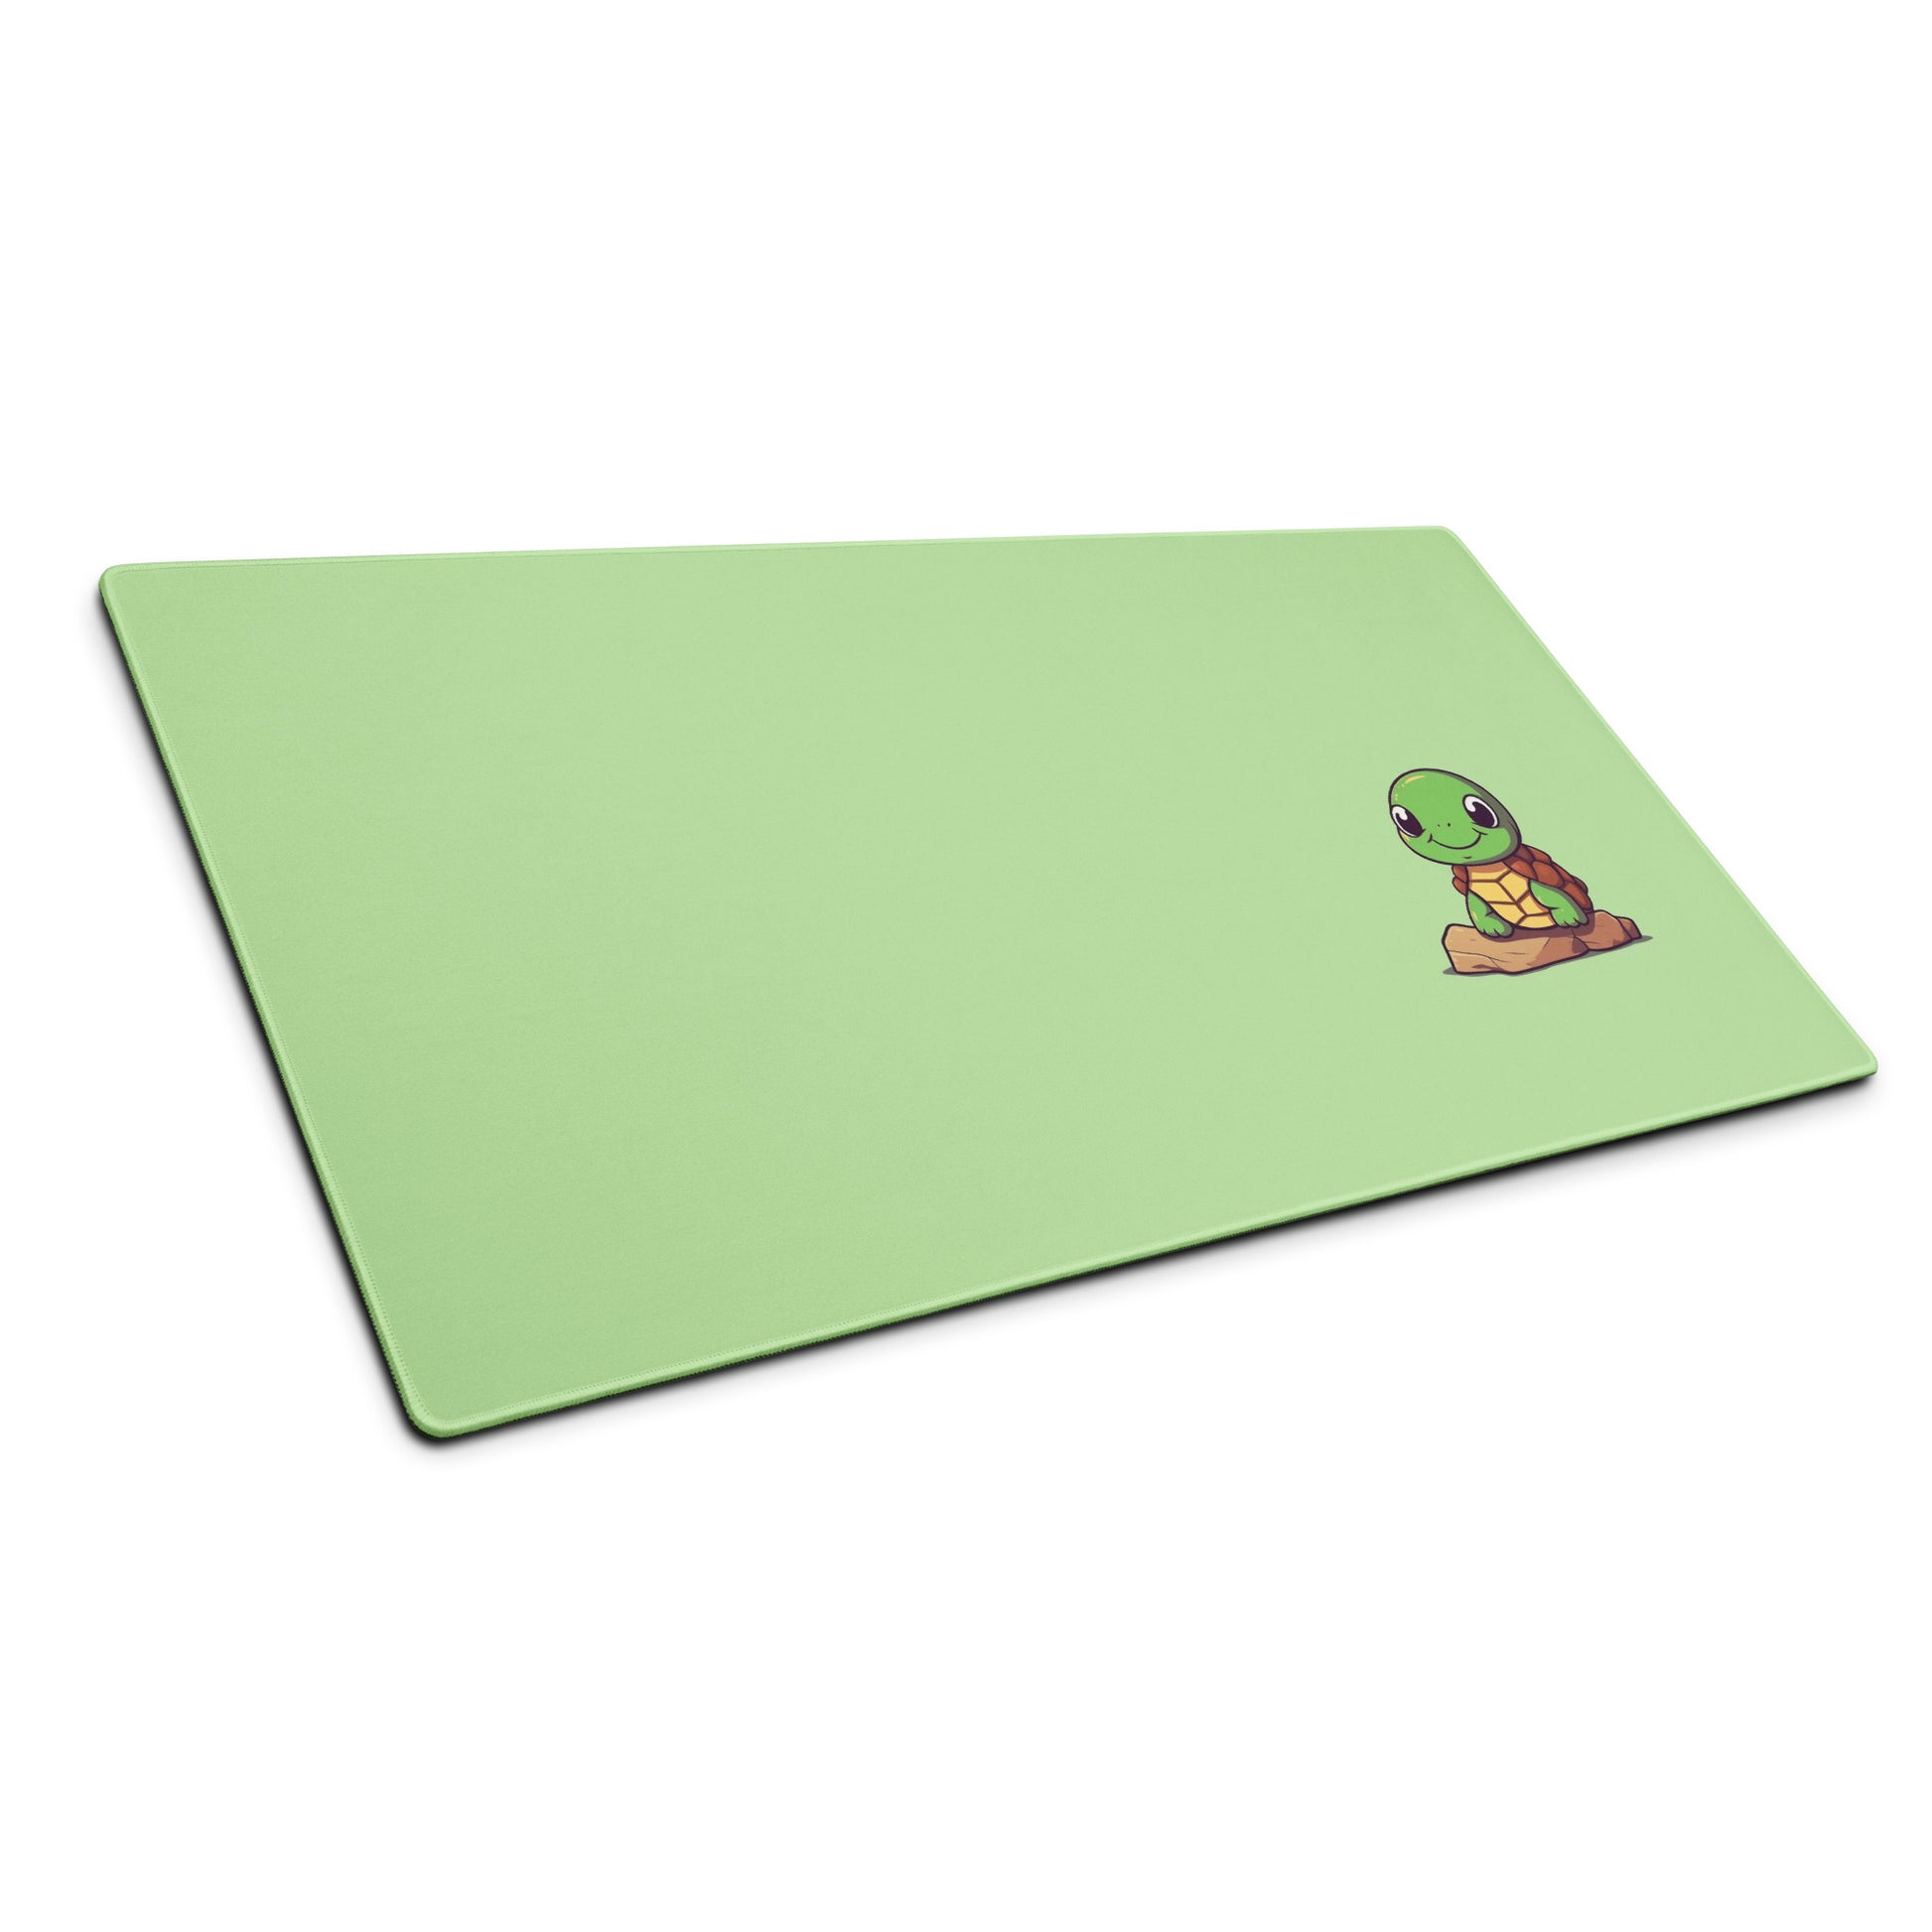 A 36" x 18" desk pad with a picture of a cute turtle sitting on a rock shown at an angle. Green in color.